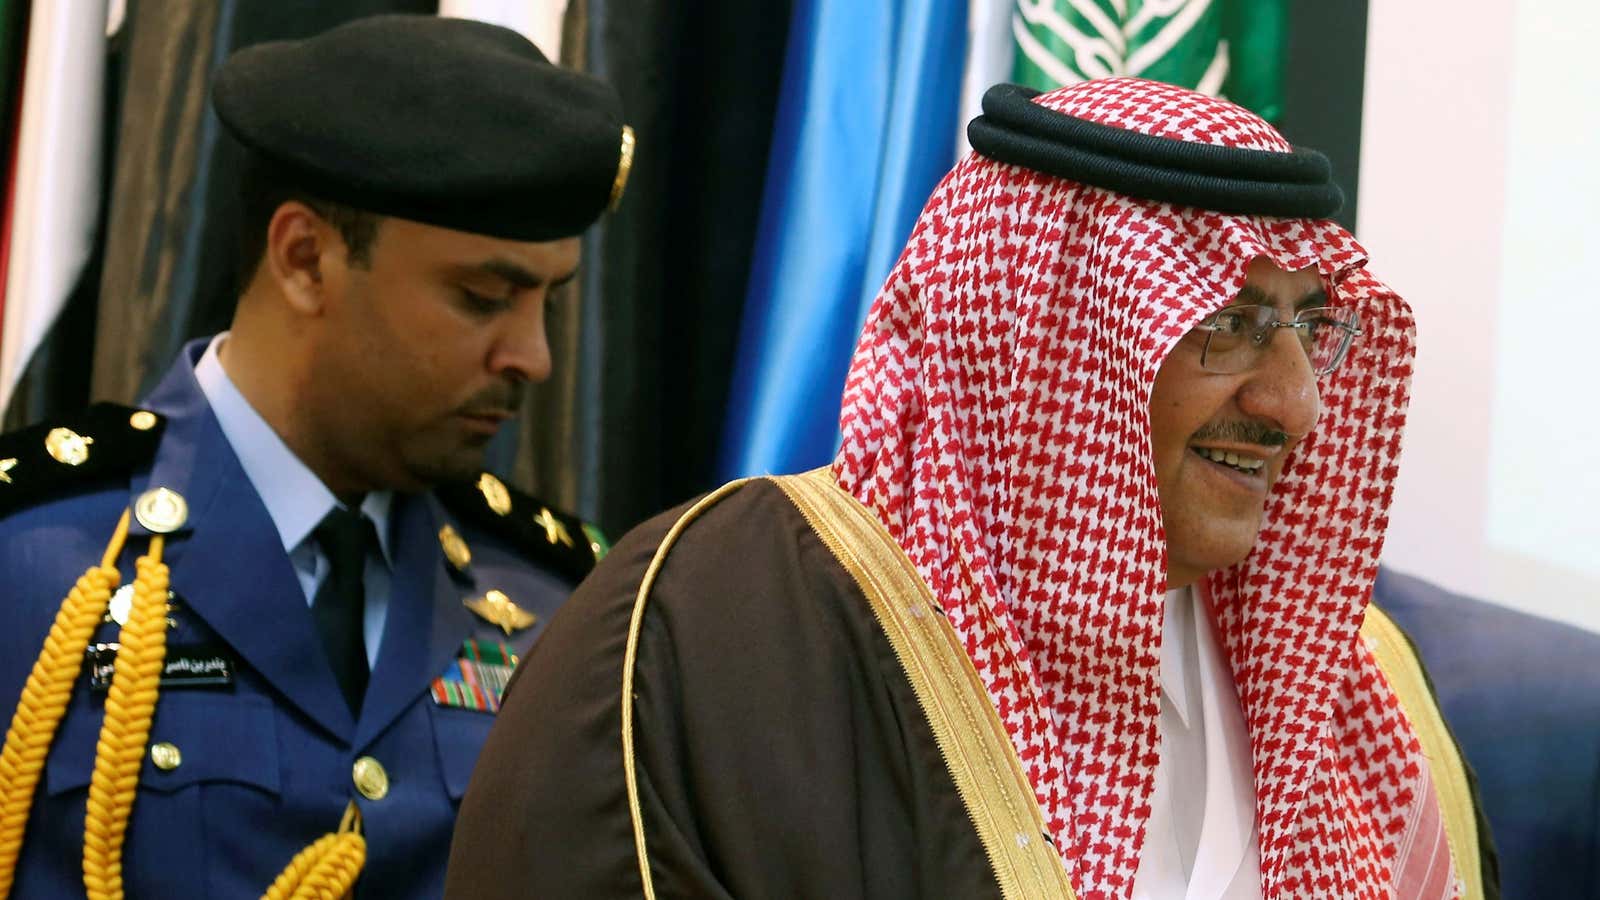 Crown Prince Mohammed bin Nayef didn’t need help for long.